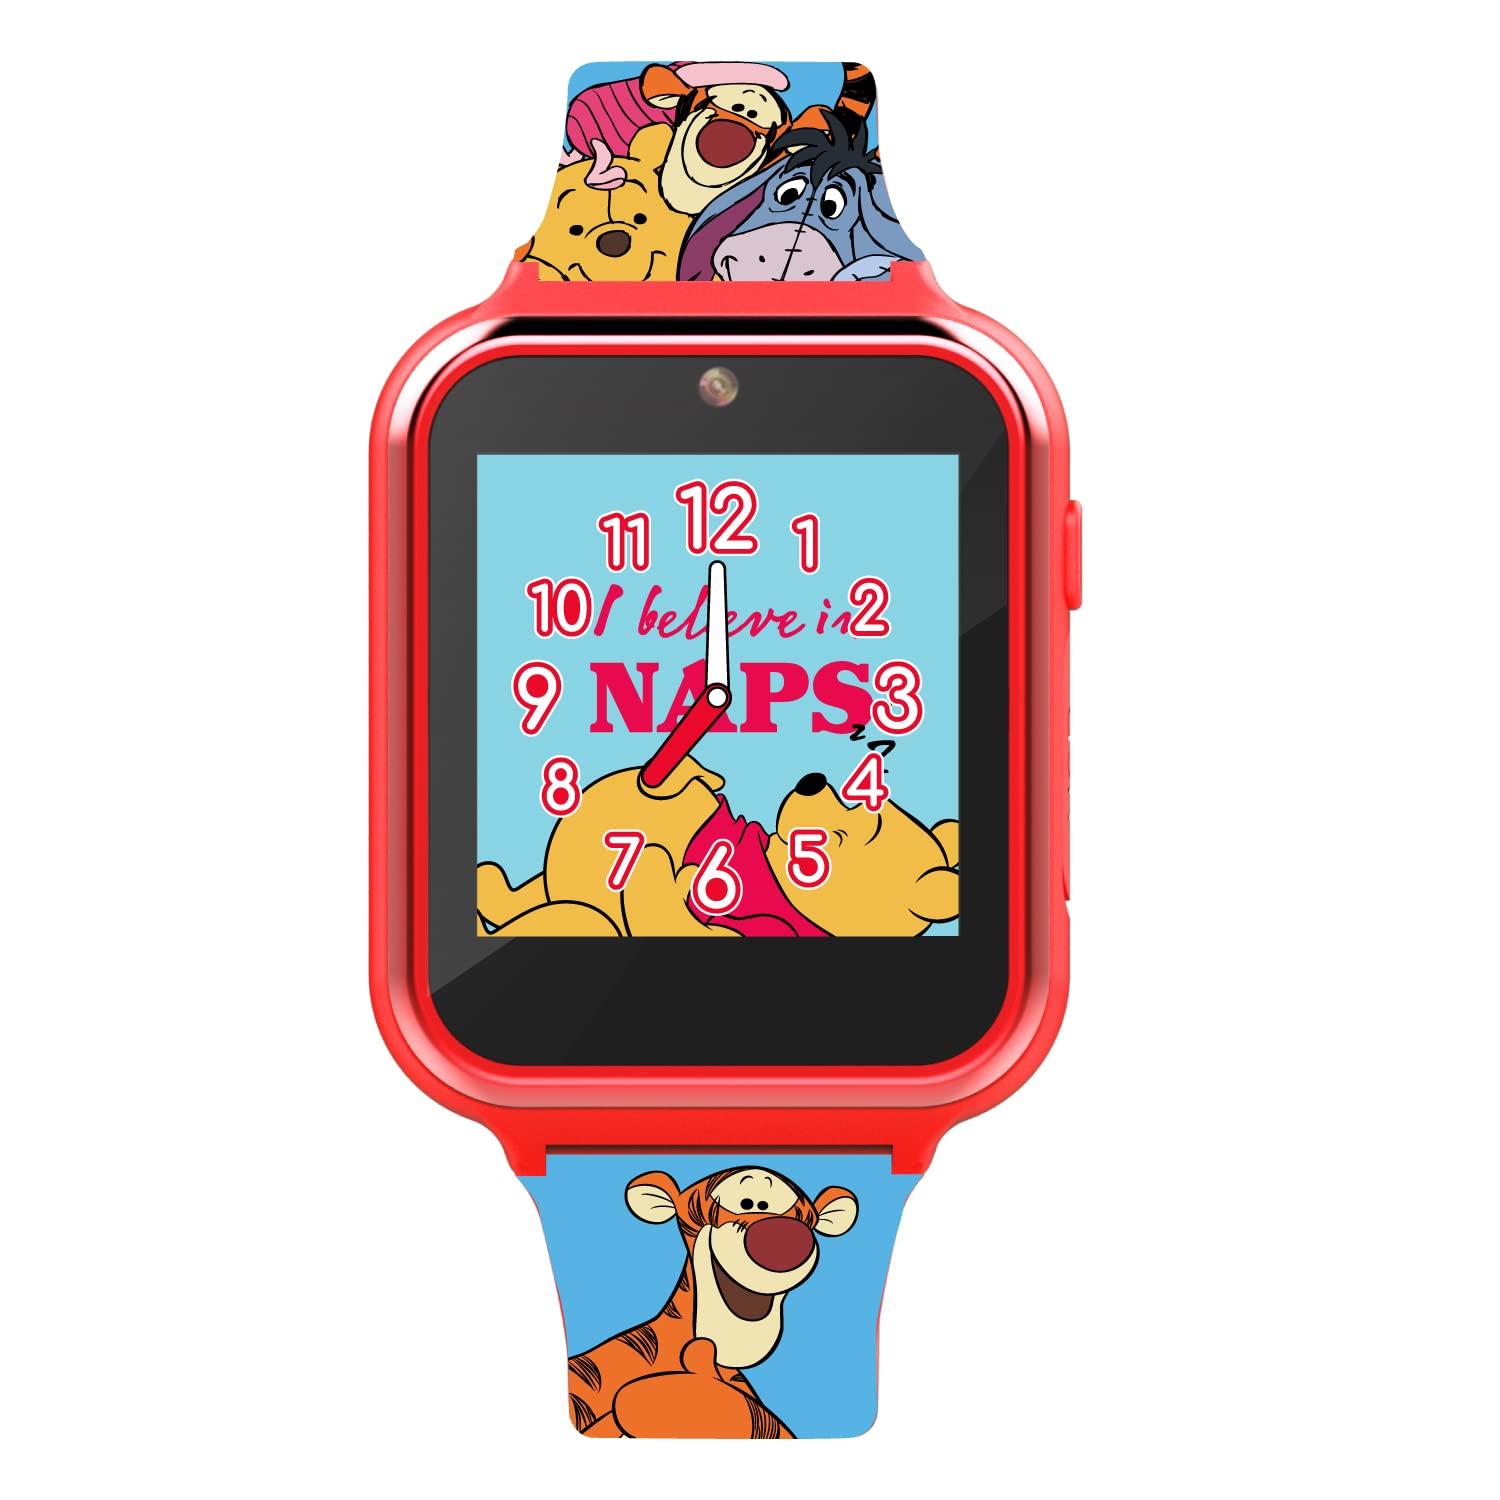 Accutime Winnie The Pooh Kids Educational Learning Touchscreen Pink Smart Watch Toy with Multicolor Strap for Girls, Boys, Toddlers - Selfie Cam, Games, Alarm, Calculator, Pedometer (Model: WP4007AZ)